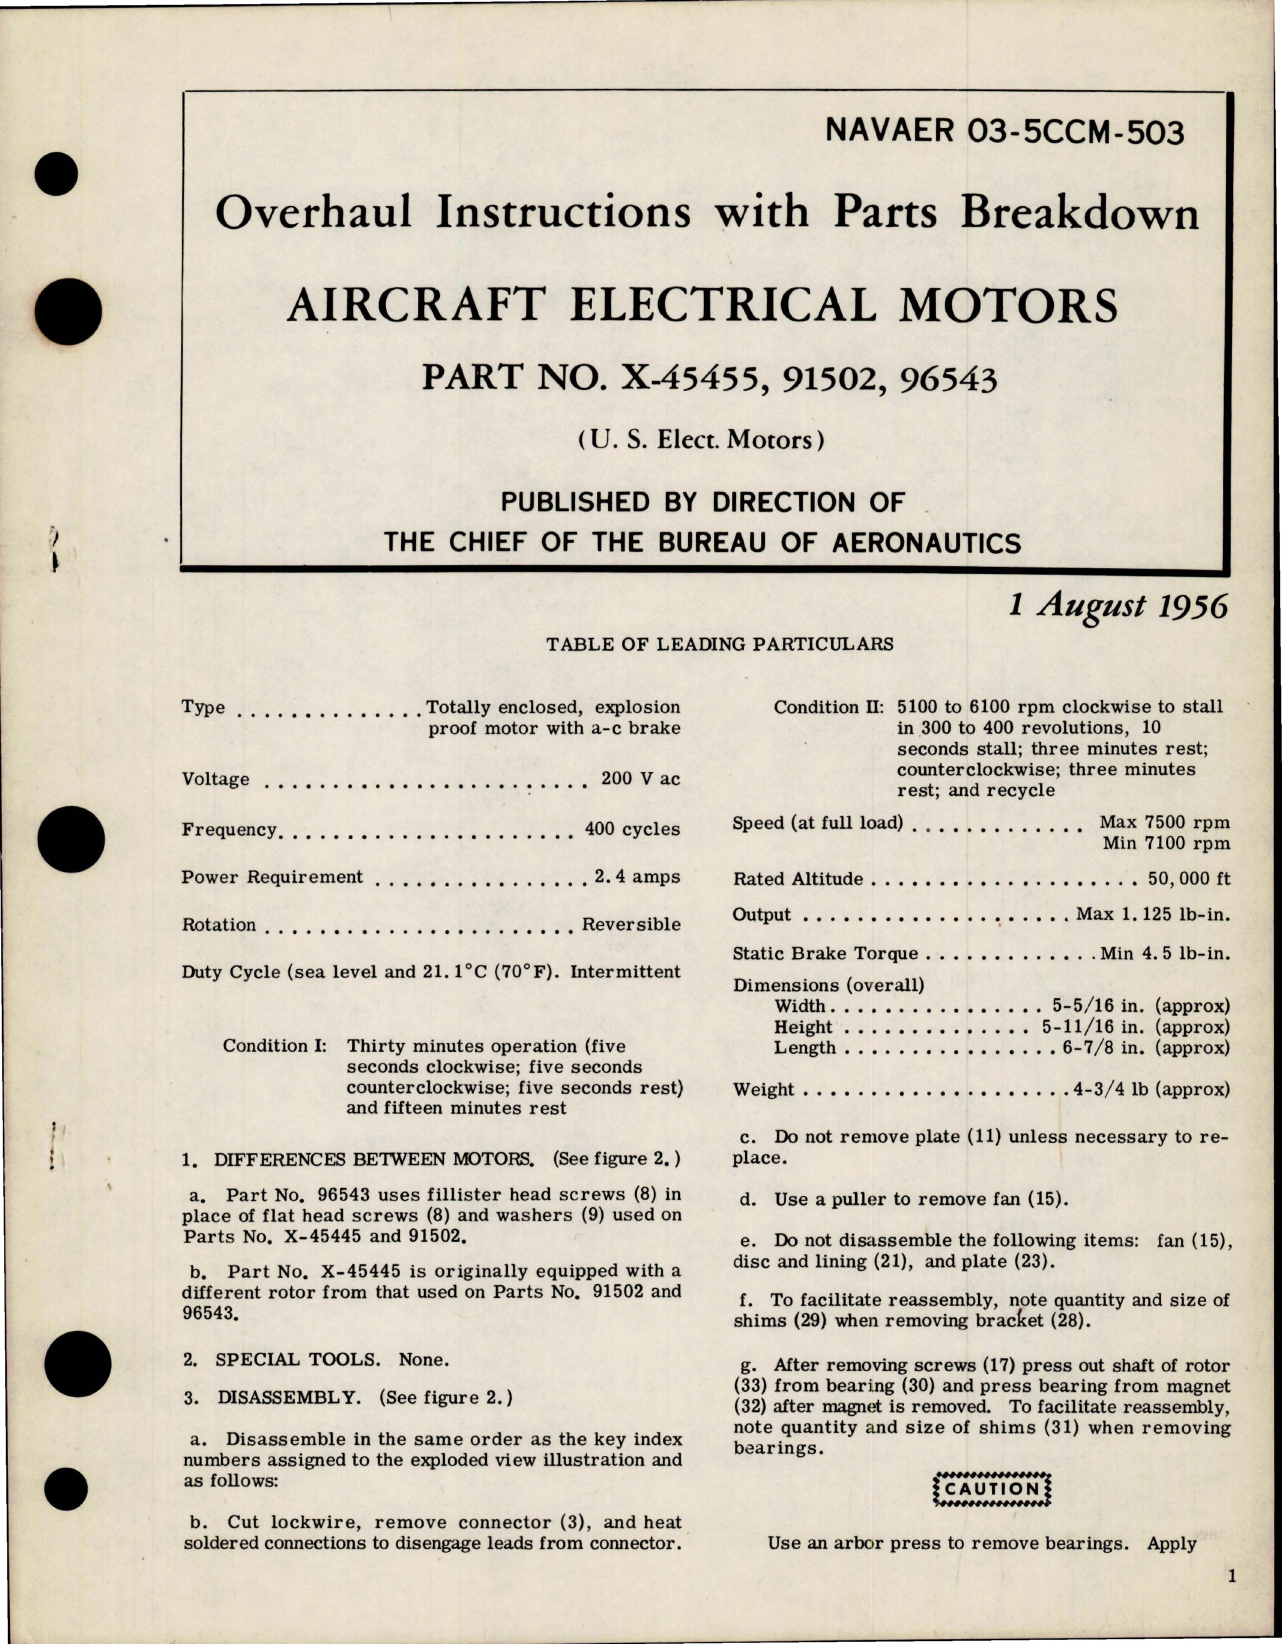 Sample page 1 from AirCorps Library document: Overhaul Instructions with Parts Breakdown for Electrical Motors - Part X-45455, 91502, 96543 